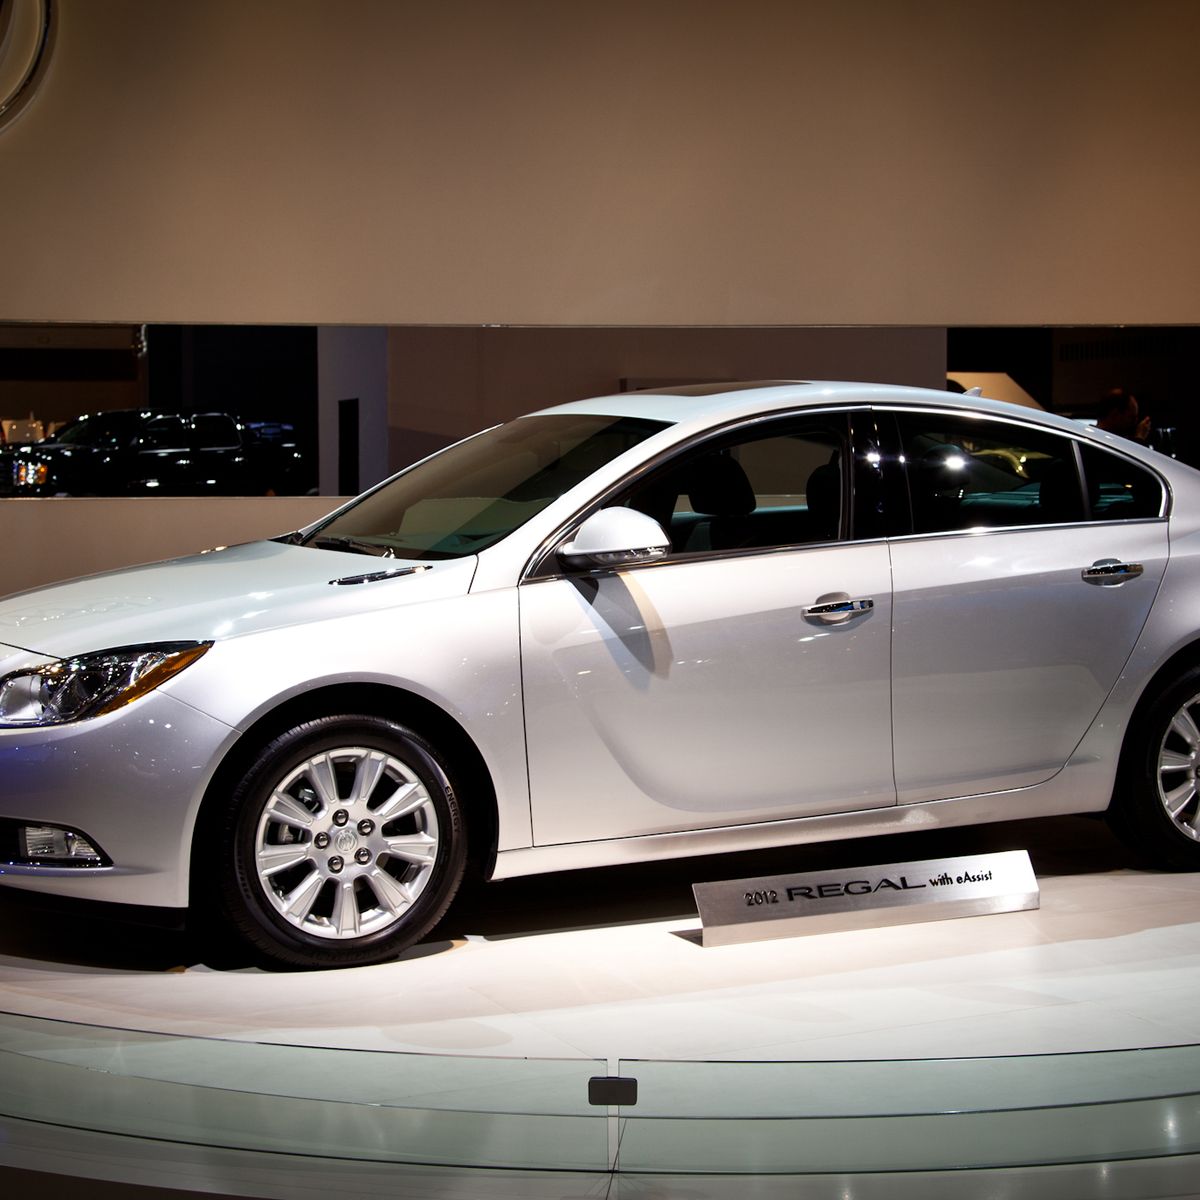 2012 Buick Regal eAssist Photos and Info: Buick Regal News – Car and  Driver